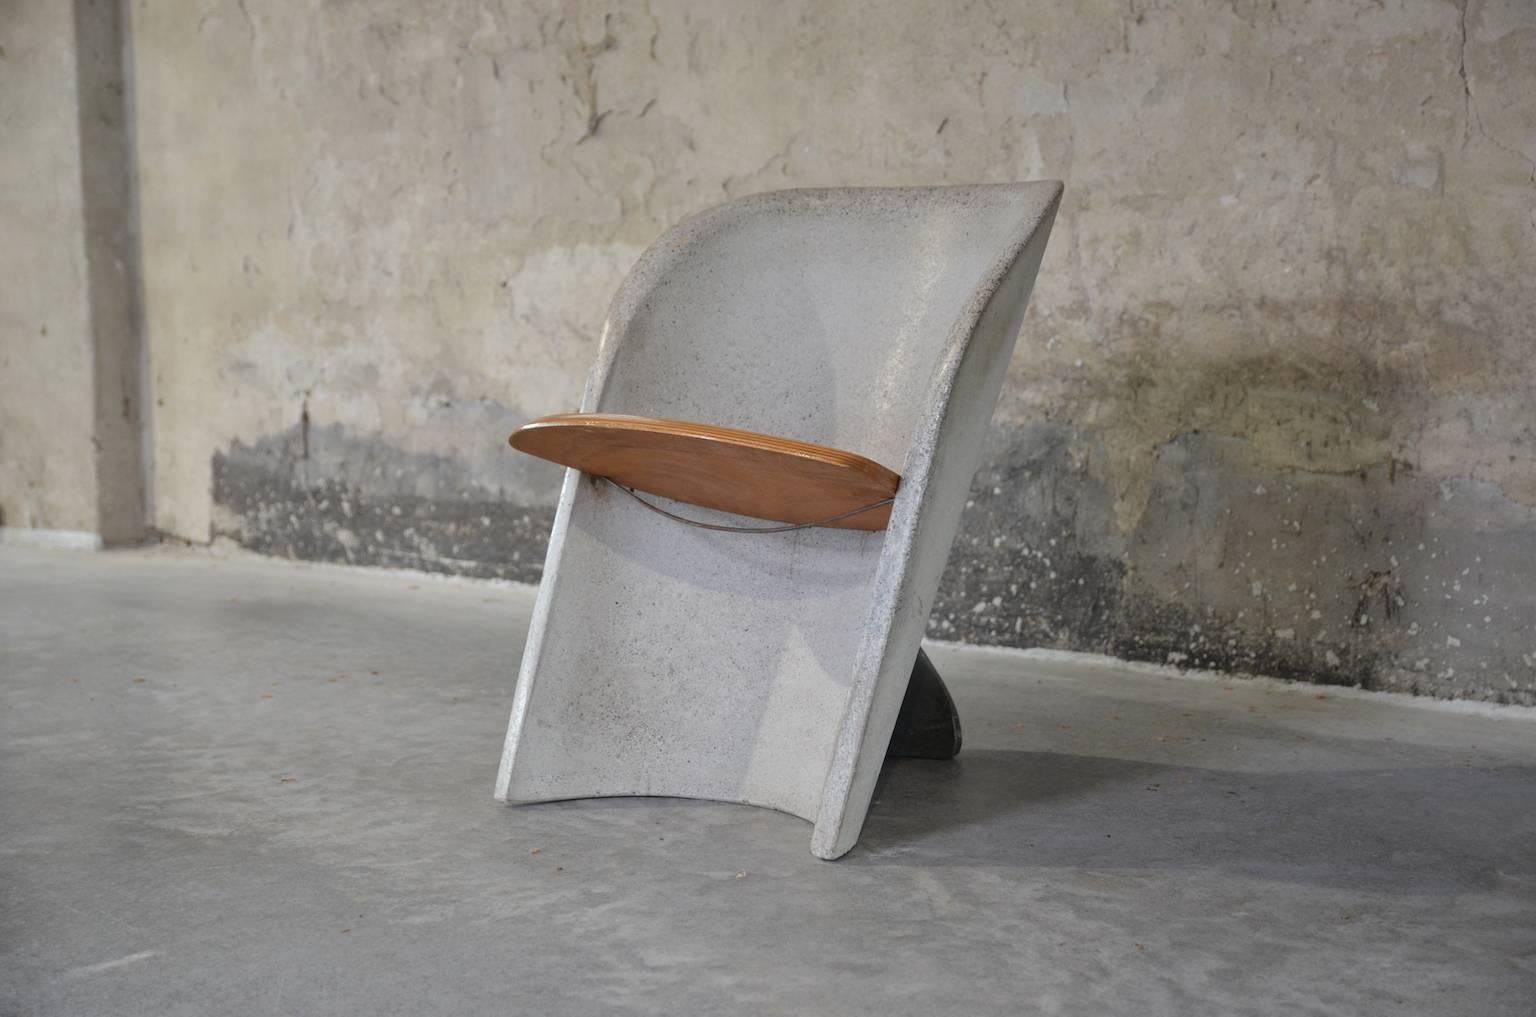 Remarkable granito chair in a semi-circular form. The grey chair remains its balance by a black fin in the back of the chair. The (removable) seat is made of wood.